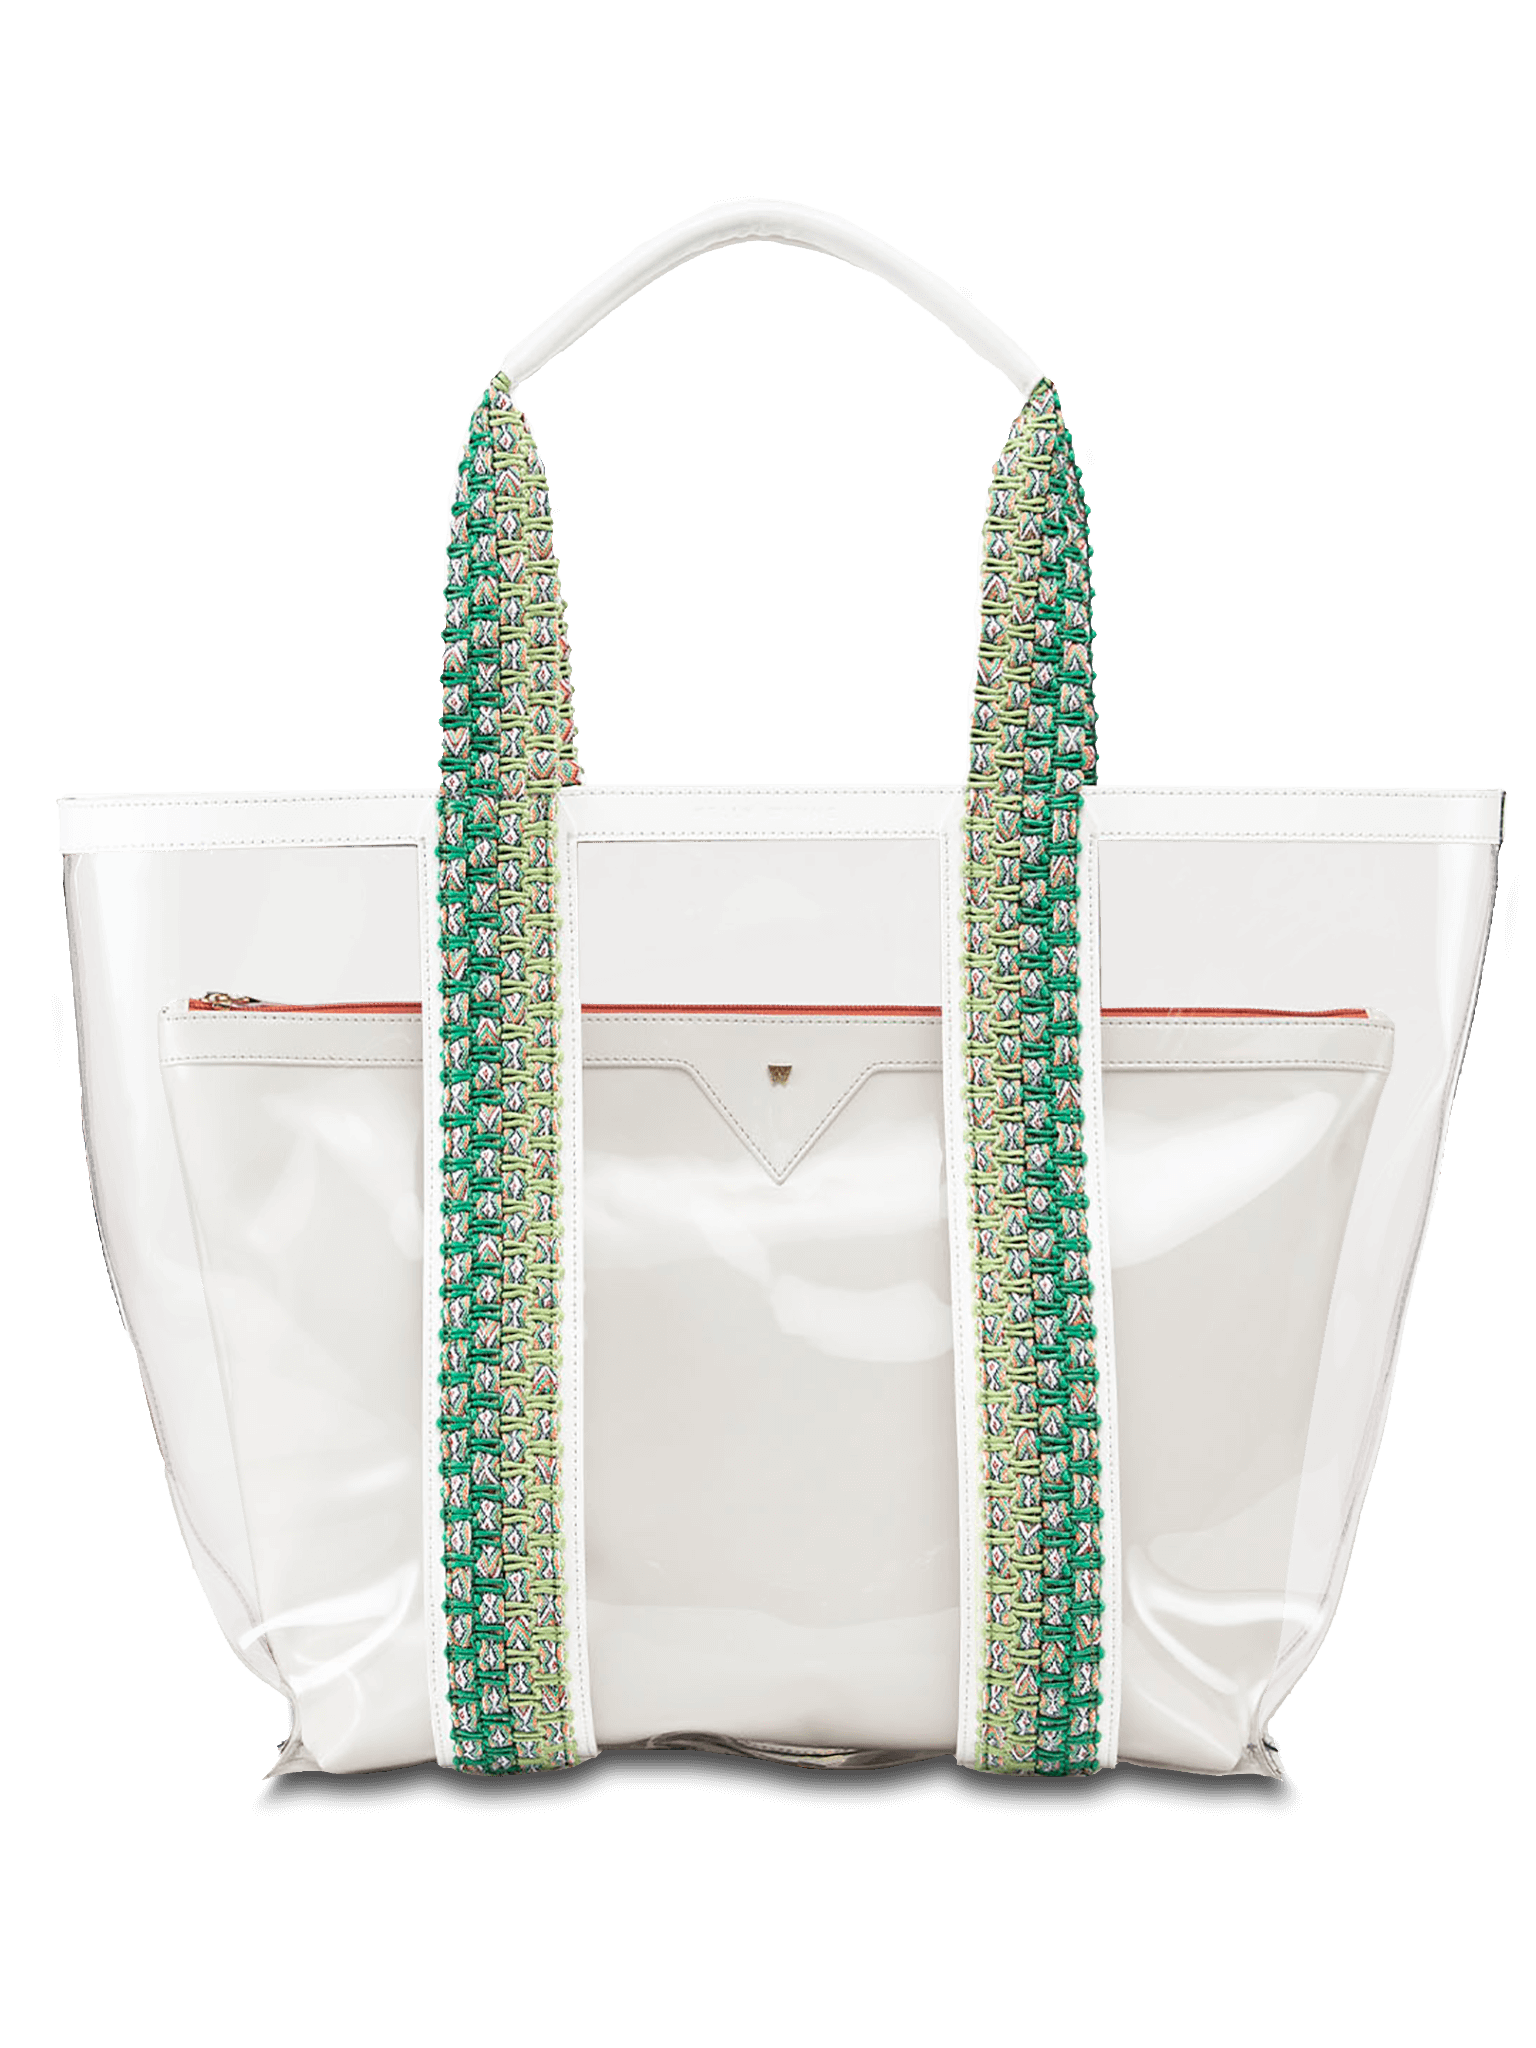 Water resistant, high-quality beach bag. Exterior tote in clear, interior patent leather pouch in White 